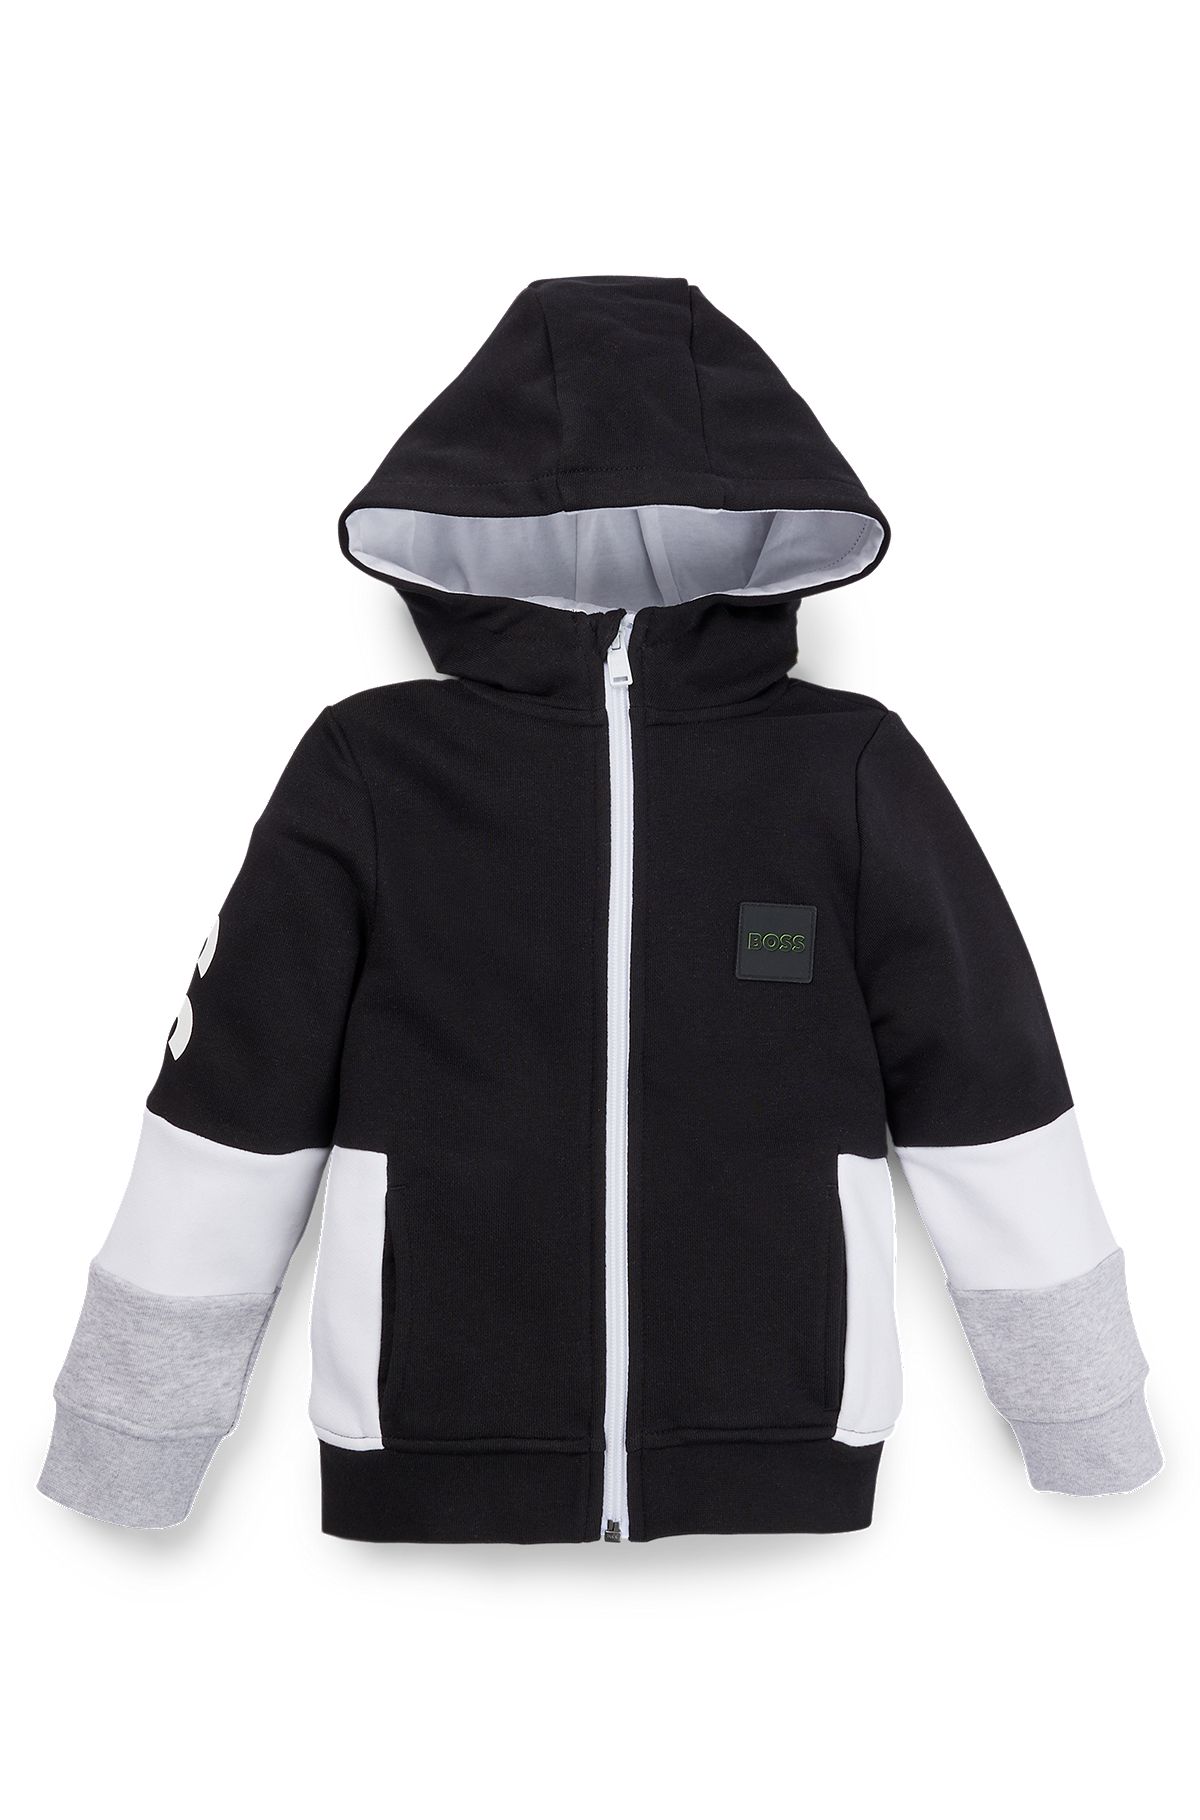 BOSS - Kids' zip-up jacket with monogram print and stripes